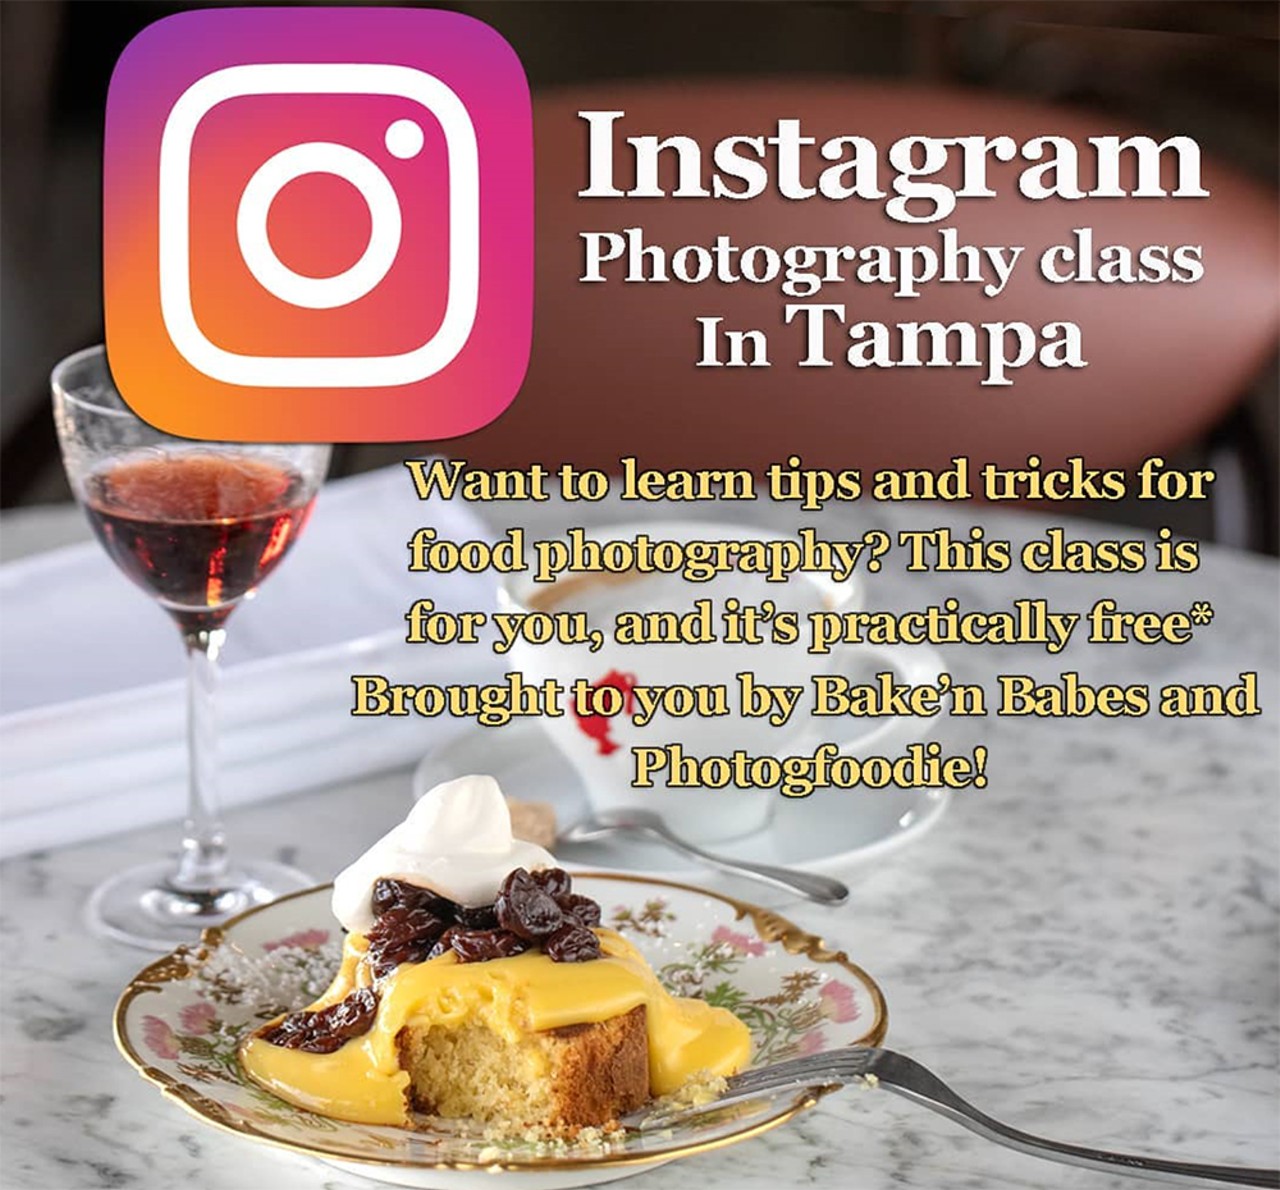  Learn how to photograph food with Chip Weiner and Bake&#146;n BabesAt the Hall on Franklin in Tampa. There&#146;s a $25 deposit, but you get that money back in the form of Bake&#146;n Babes coupons. So it&#146;s practically free. Get more details and sign up by clicking on that big red hyperlink above.Sat., Apr. 13, 9-11 a.m.
Photo via Instagram @photogfoodie